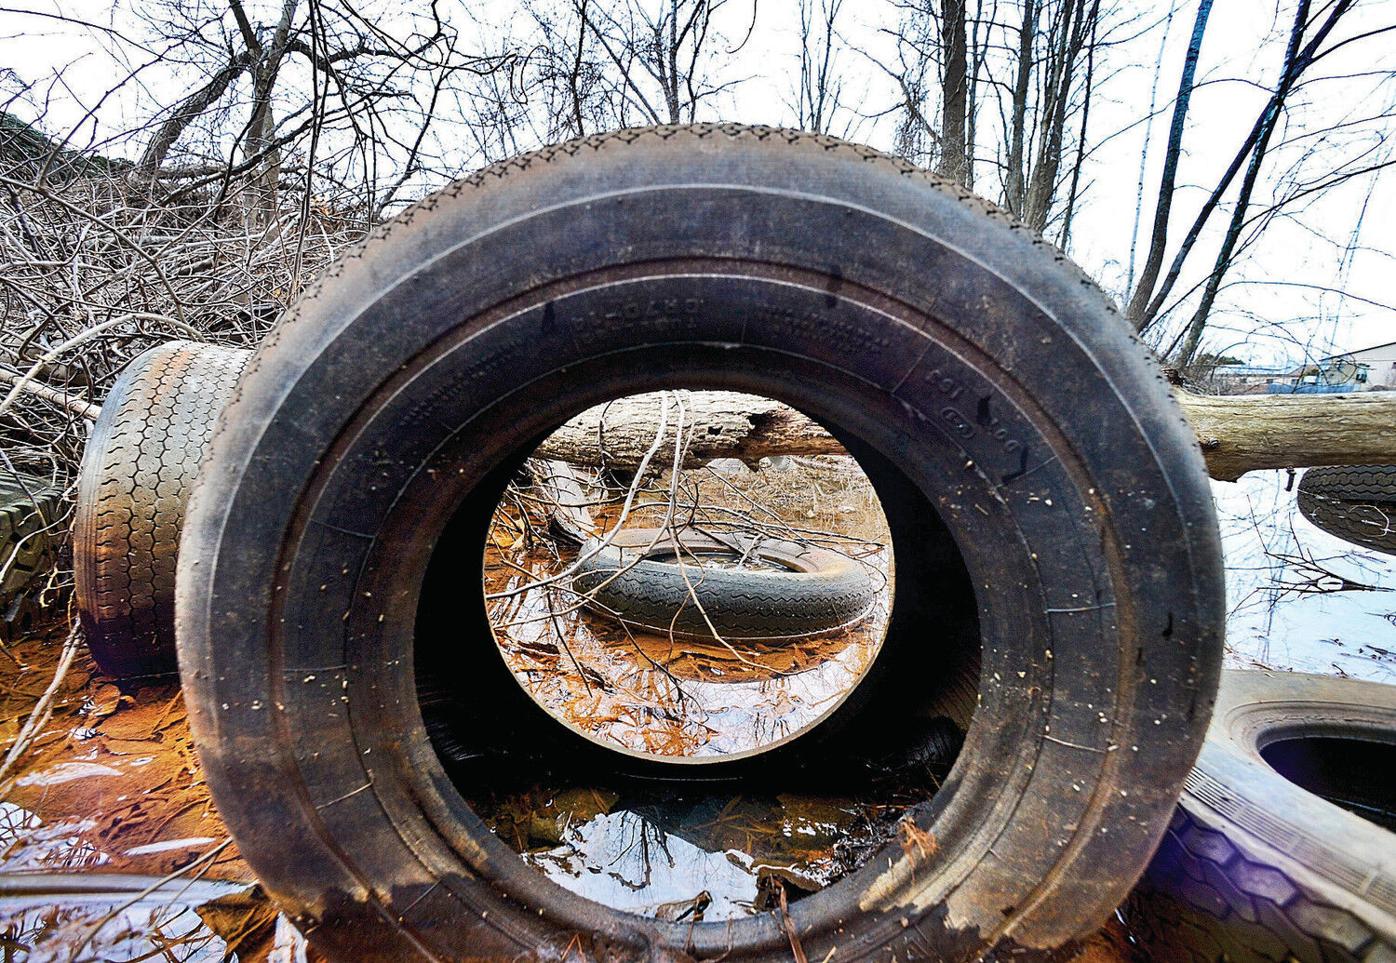 Tire Dump Targeted For Cleanup Local News 1971